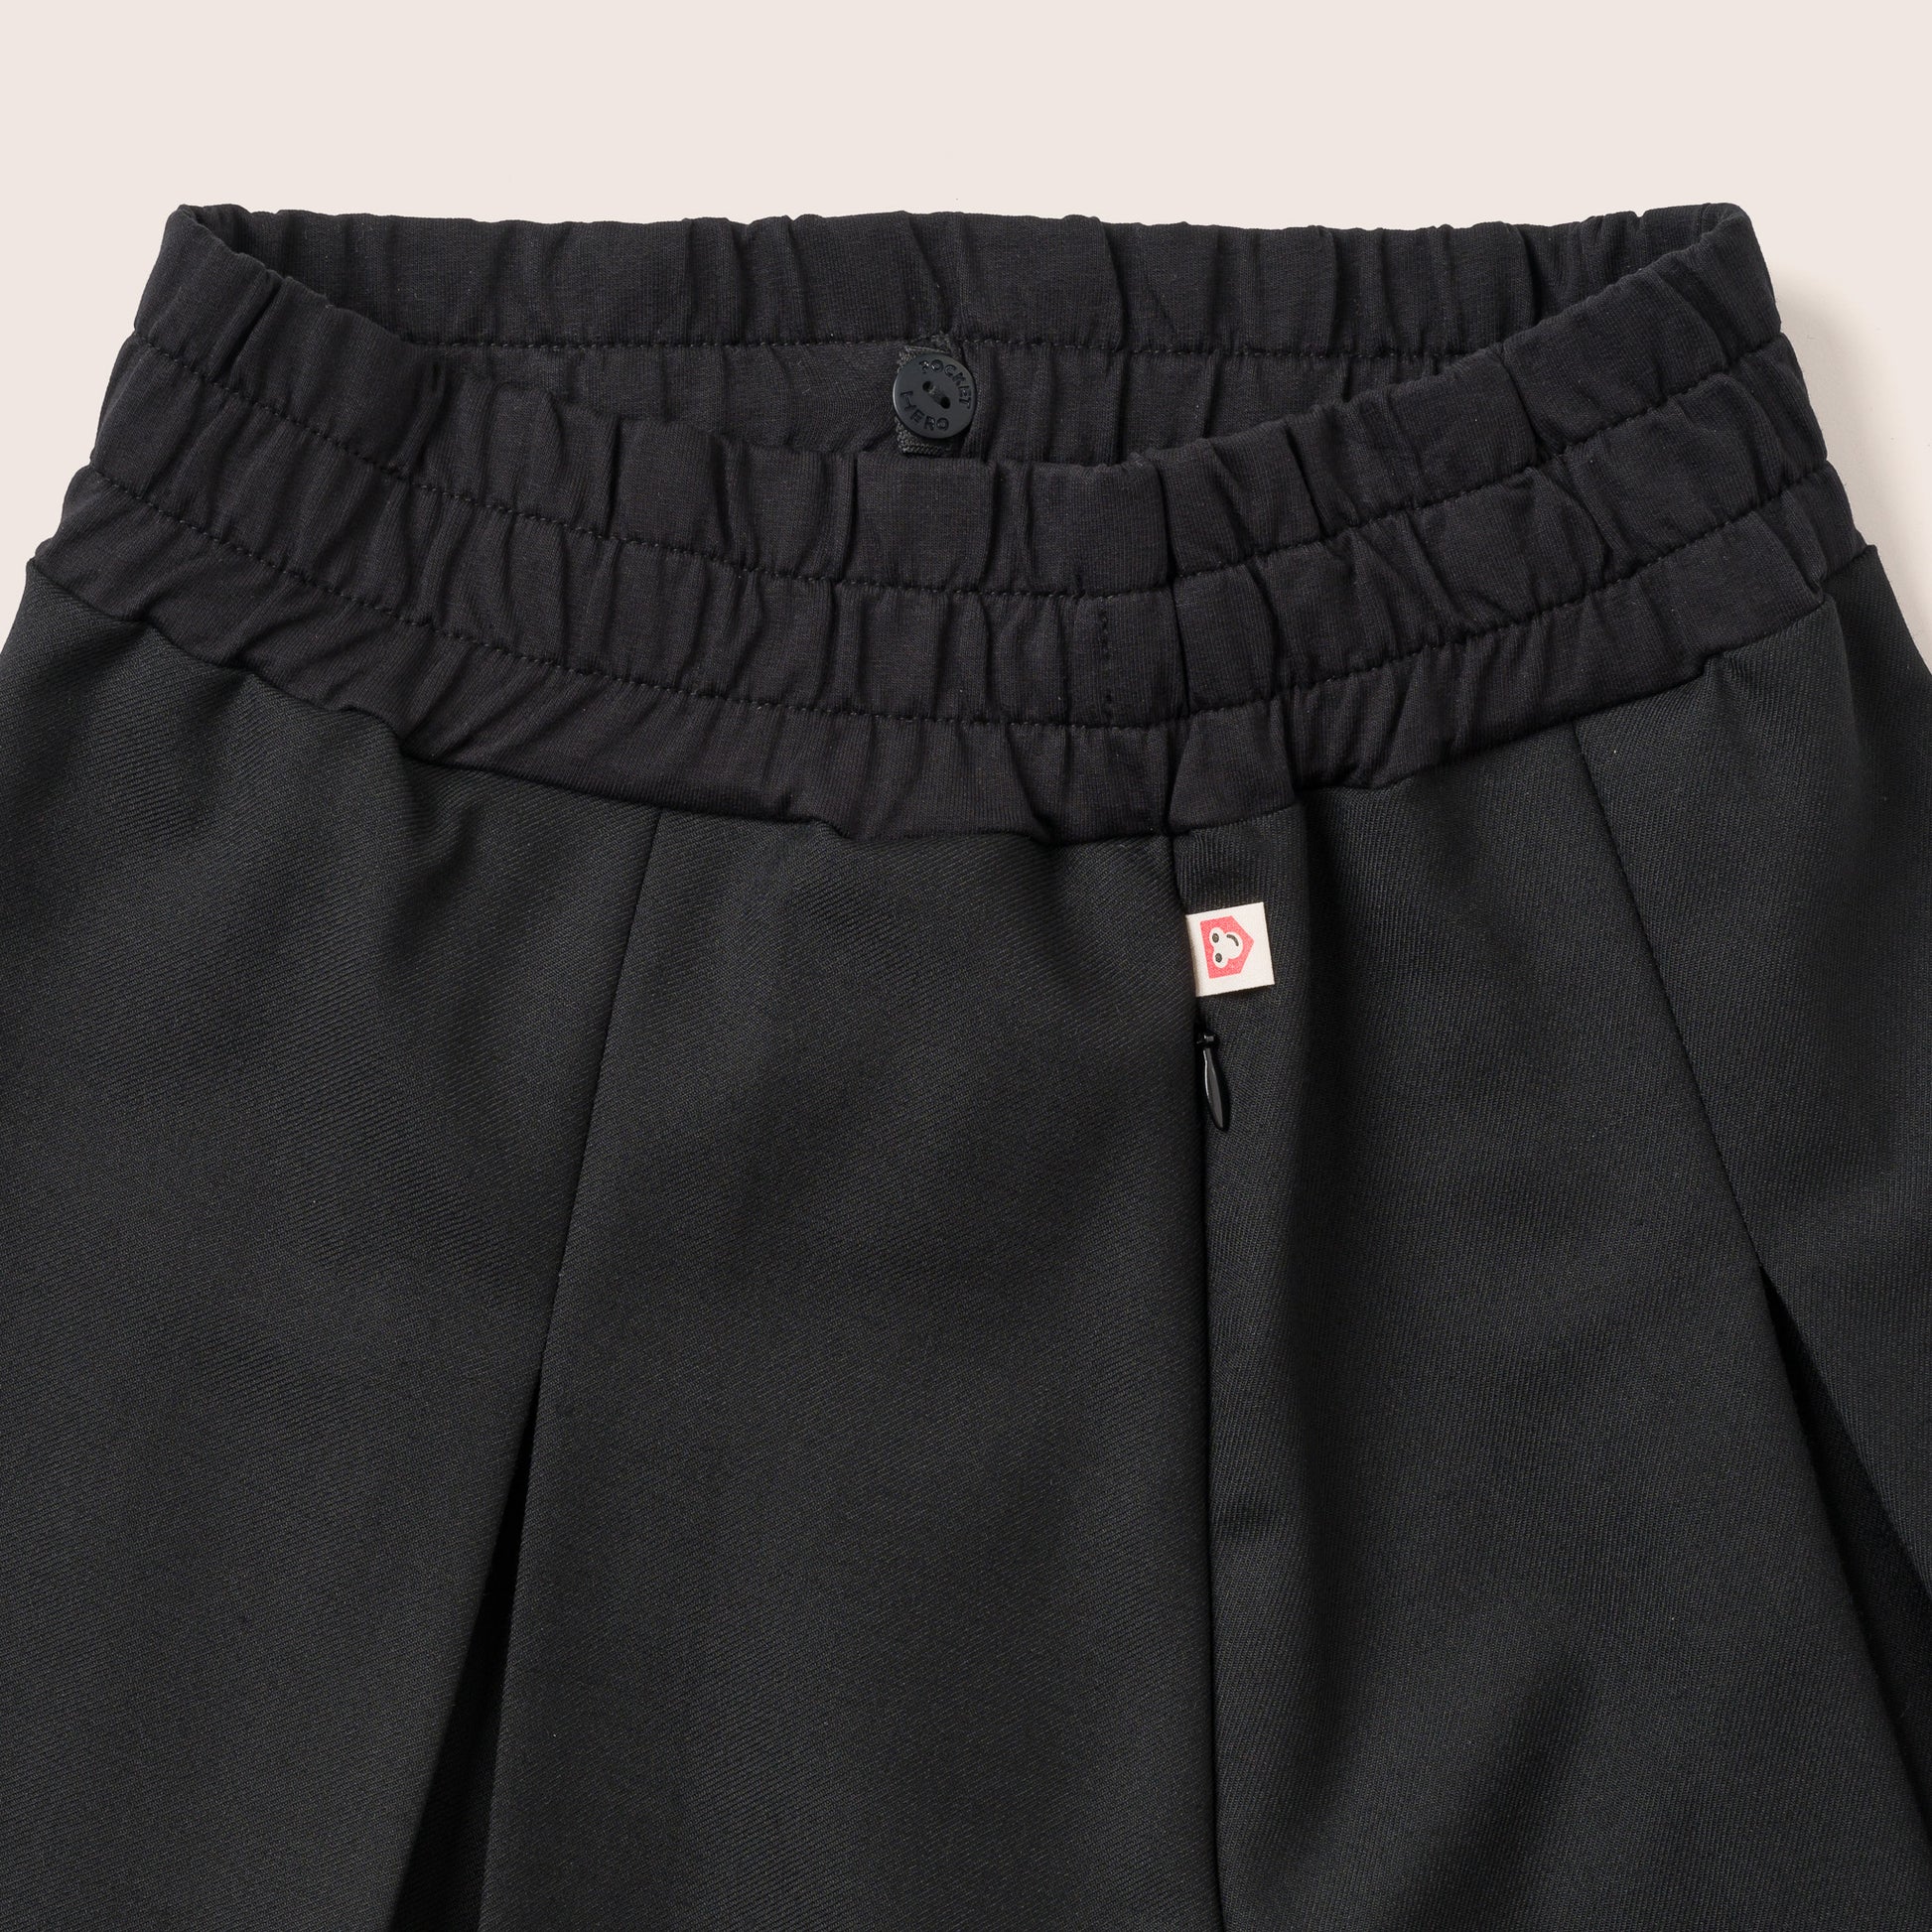 Type 1 Diabetes Clothing - Girls Skirt Black with pockets | Our Pocket Hero